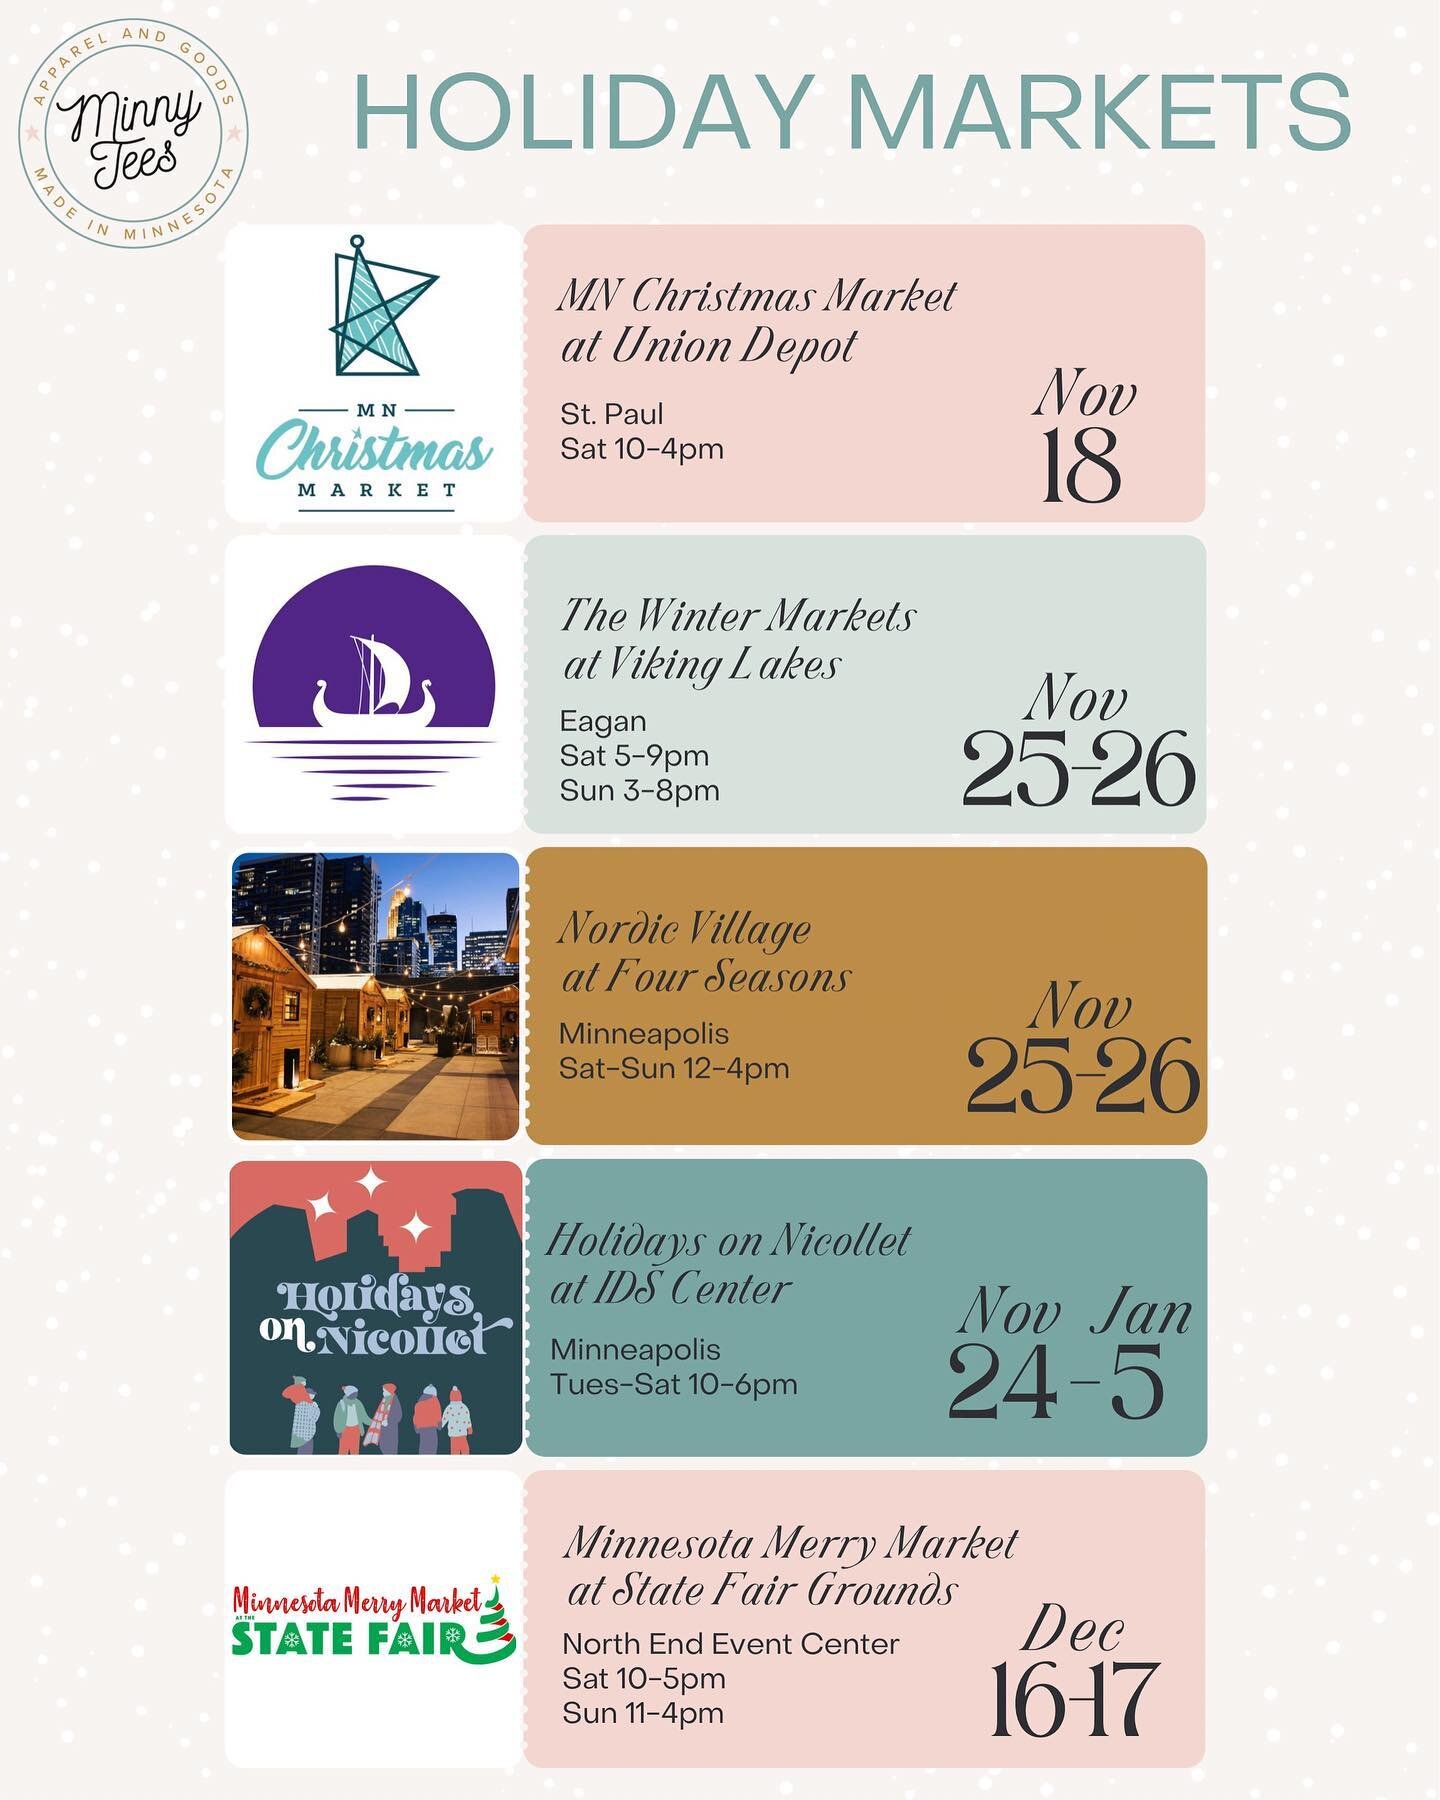 Holiday market schedule 💜 Come by and say hi and shop local with so many other amazing makers!
#shoplocal #shopsmallmn #madeinminnesota #twincities #holidayseason #holidayshopping